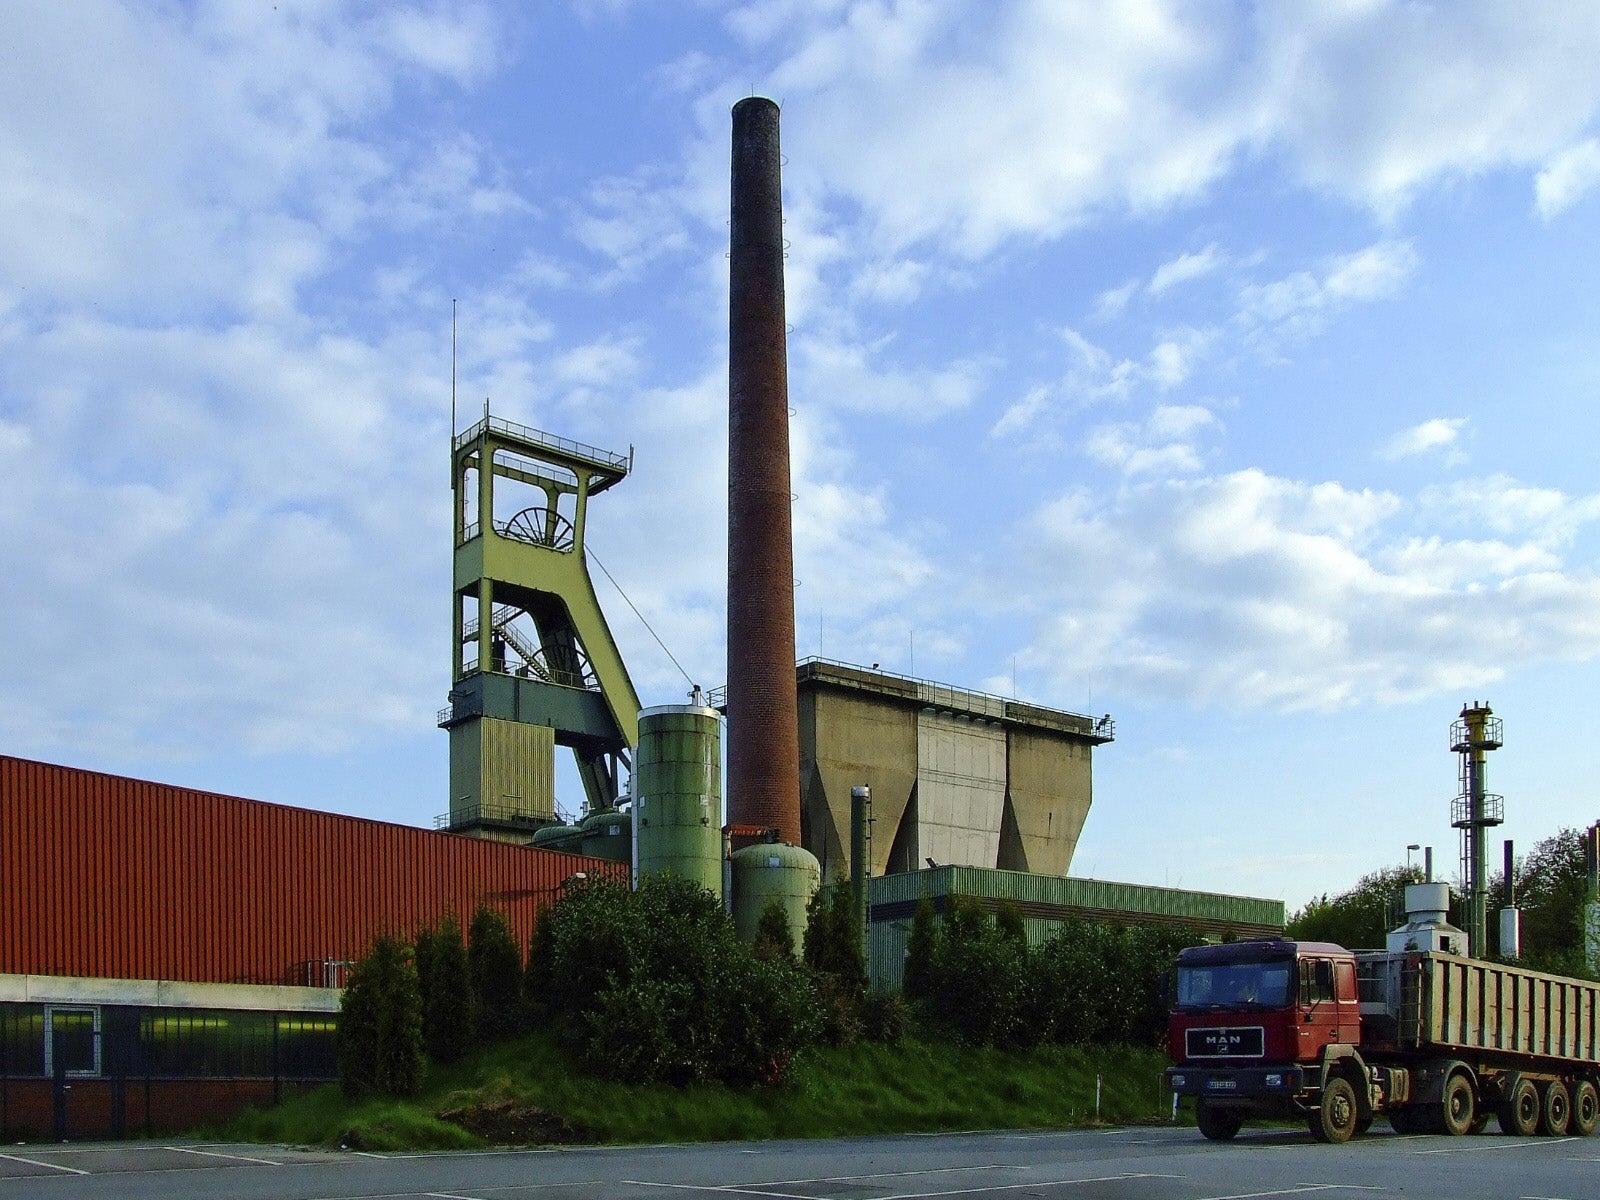 The Prosper Haniel hard coal mine in the state of North-Rhine Westphalia is set to close in 2018, when a process of turning it into a clean energy facility will start